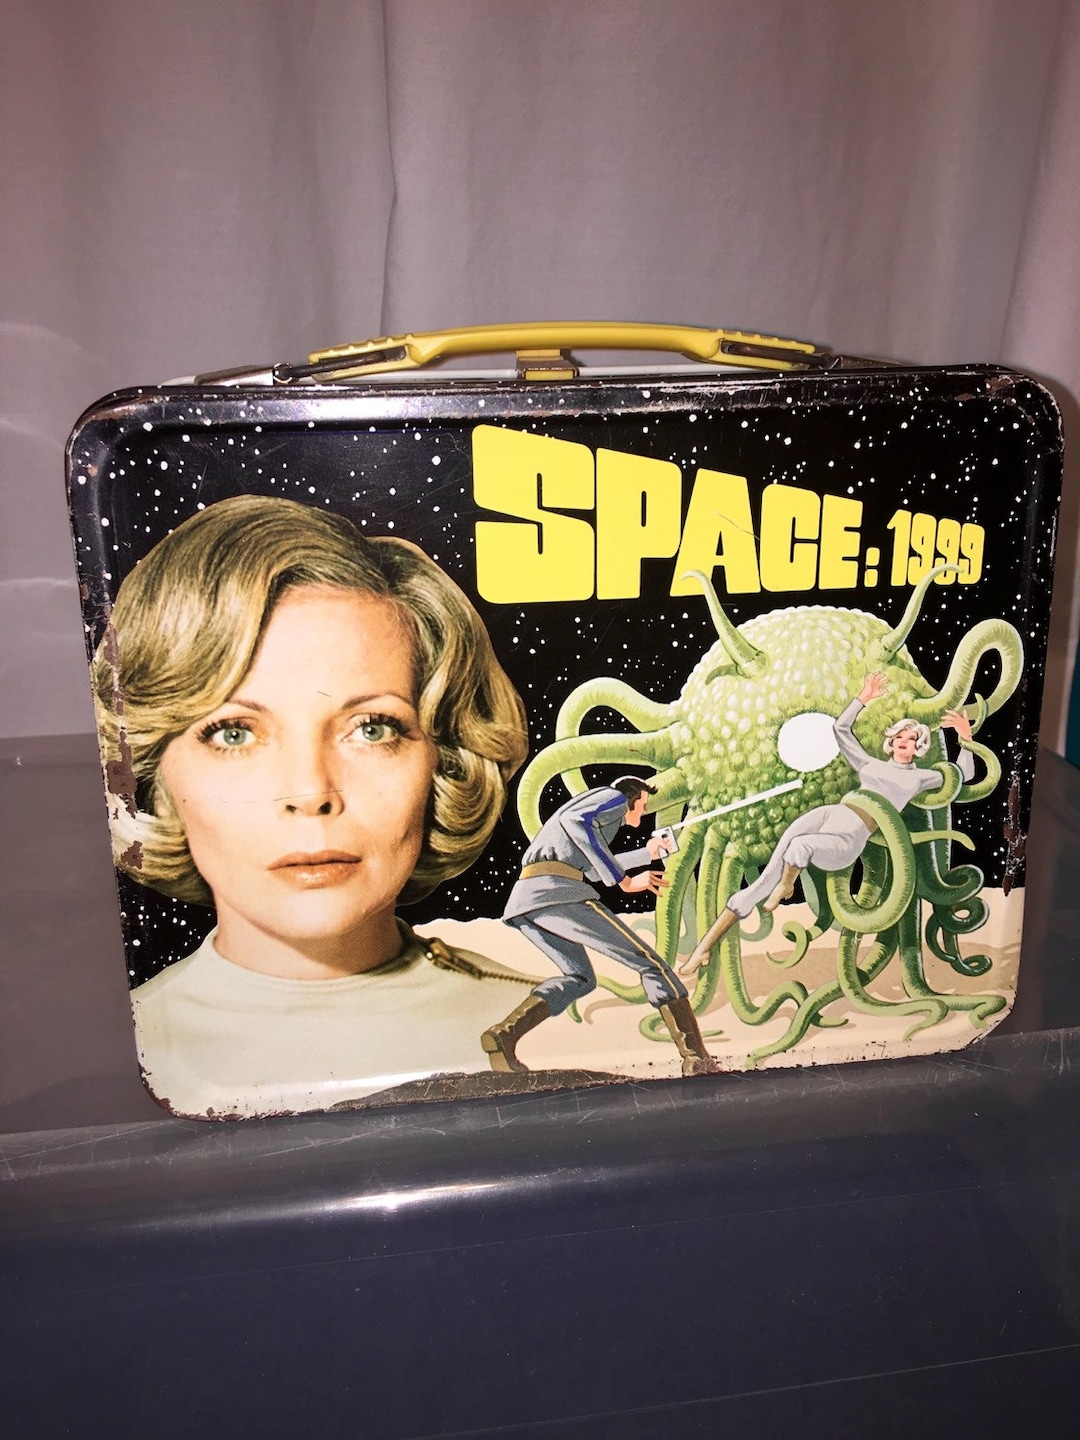 SPACE SHIPS AND SPACE MEN SCI FI SPACE DUME LUNCH BOX 1950s